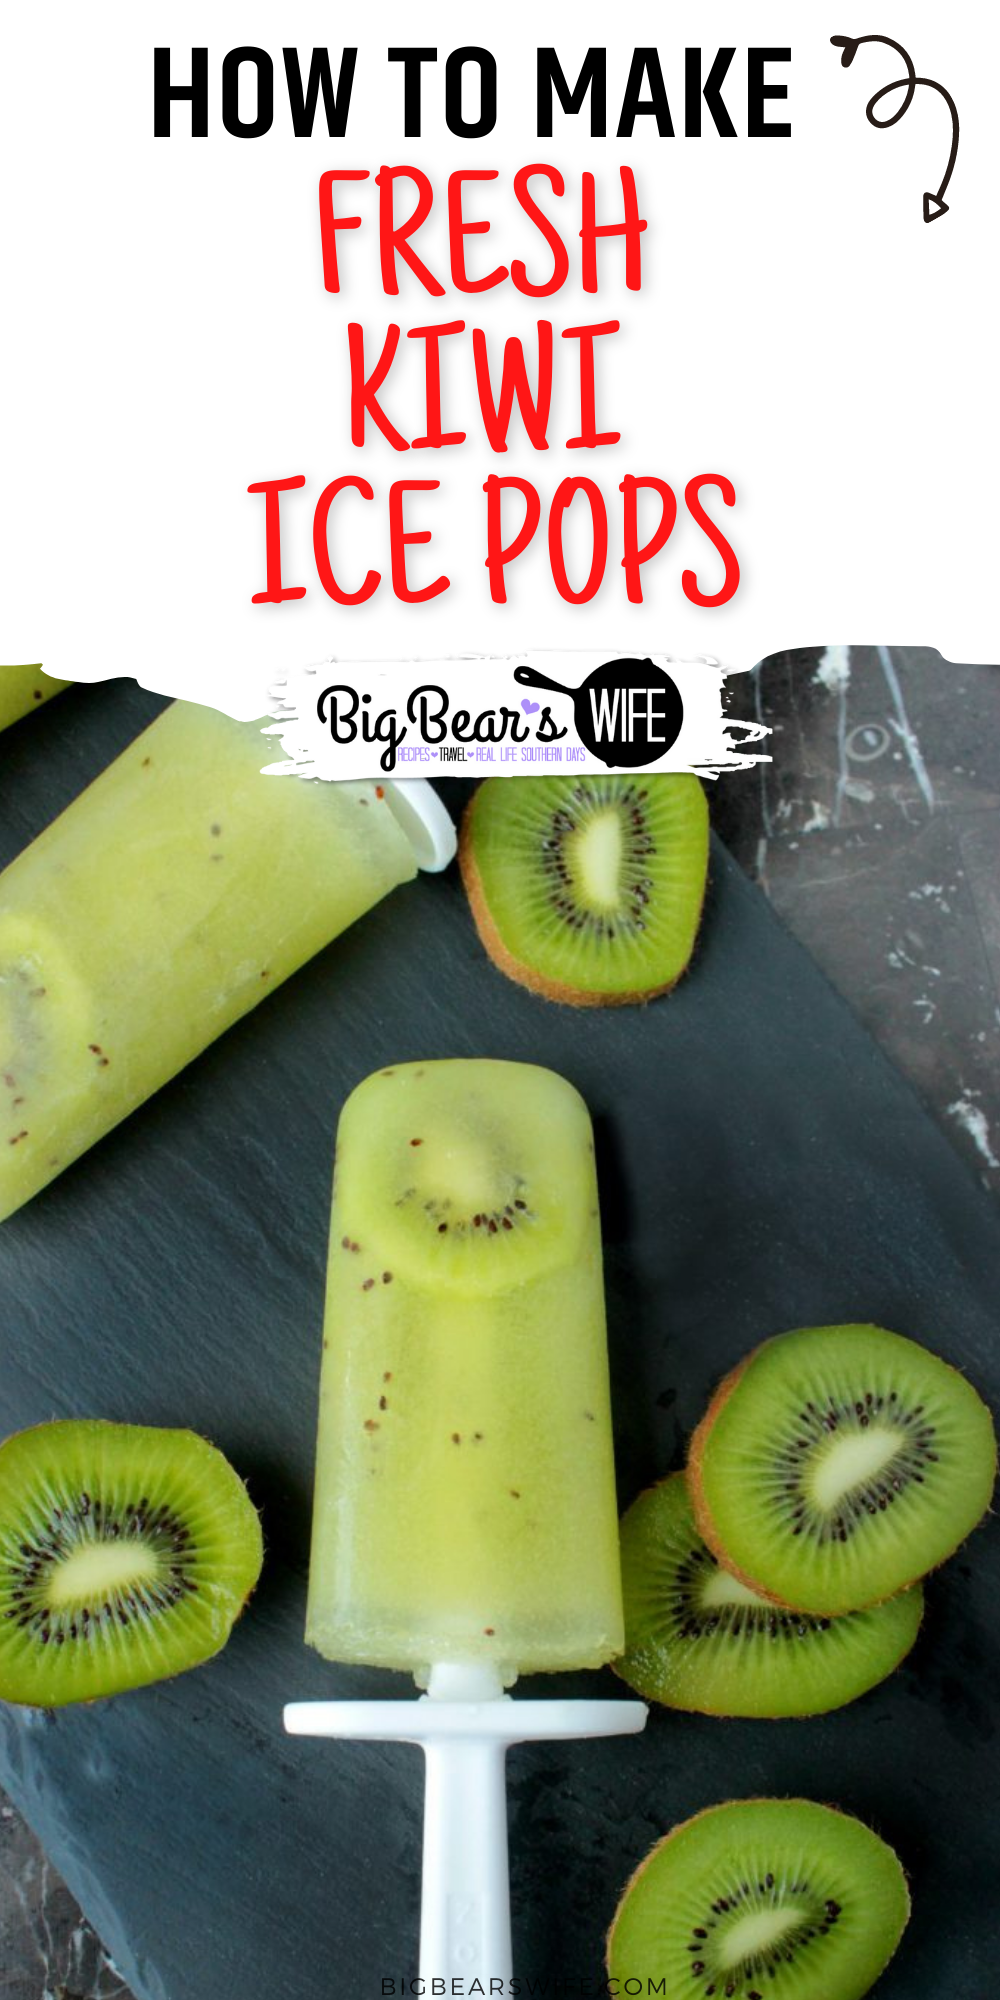 Ready for a super easy frozen treat to help you cool off this summer? These 3-ingredient Fresh Kiwi Ice Pops are made with fresh kiwis and sweetened with just a touch of sugar. via @bigbearswife